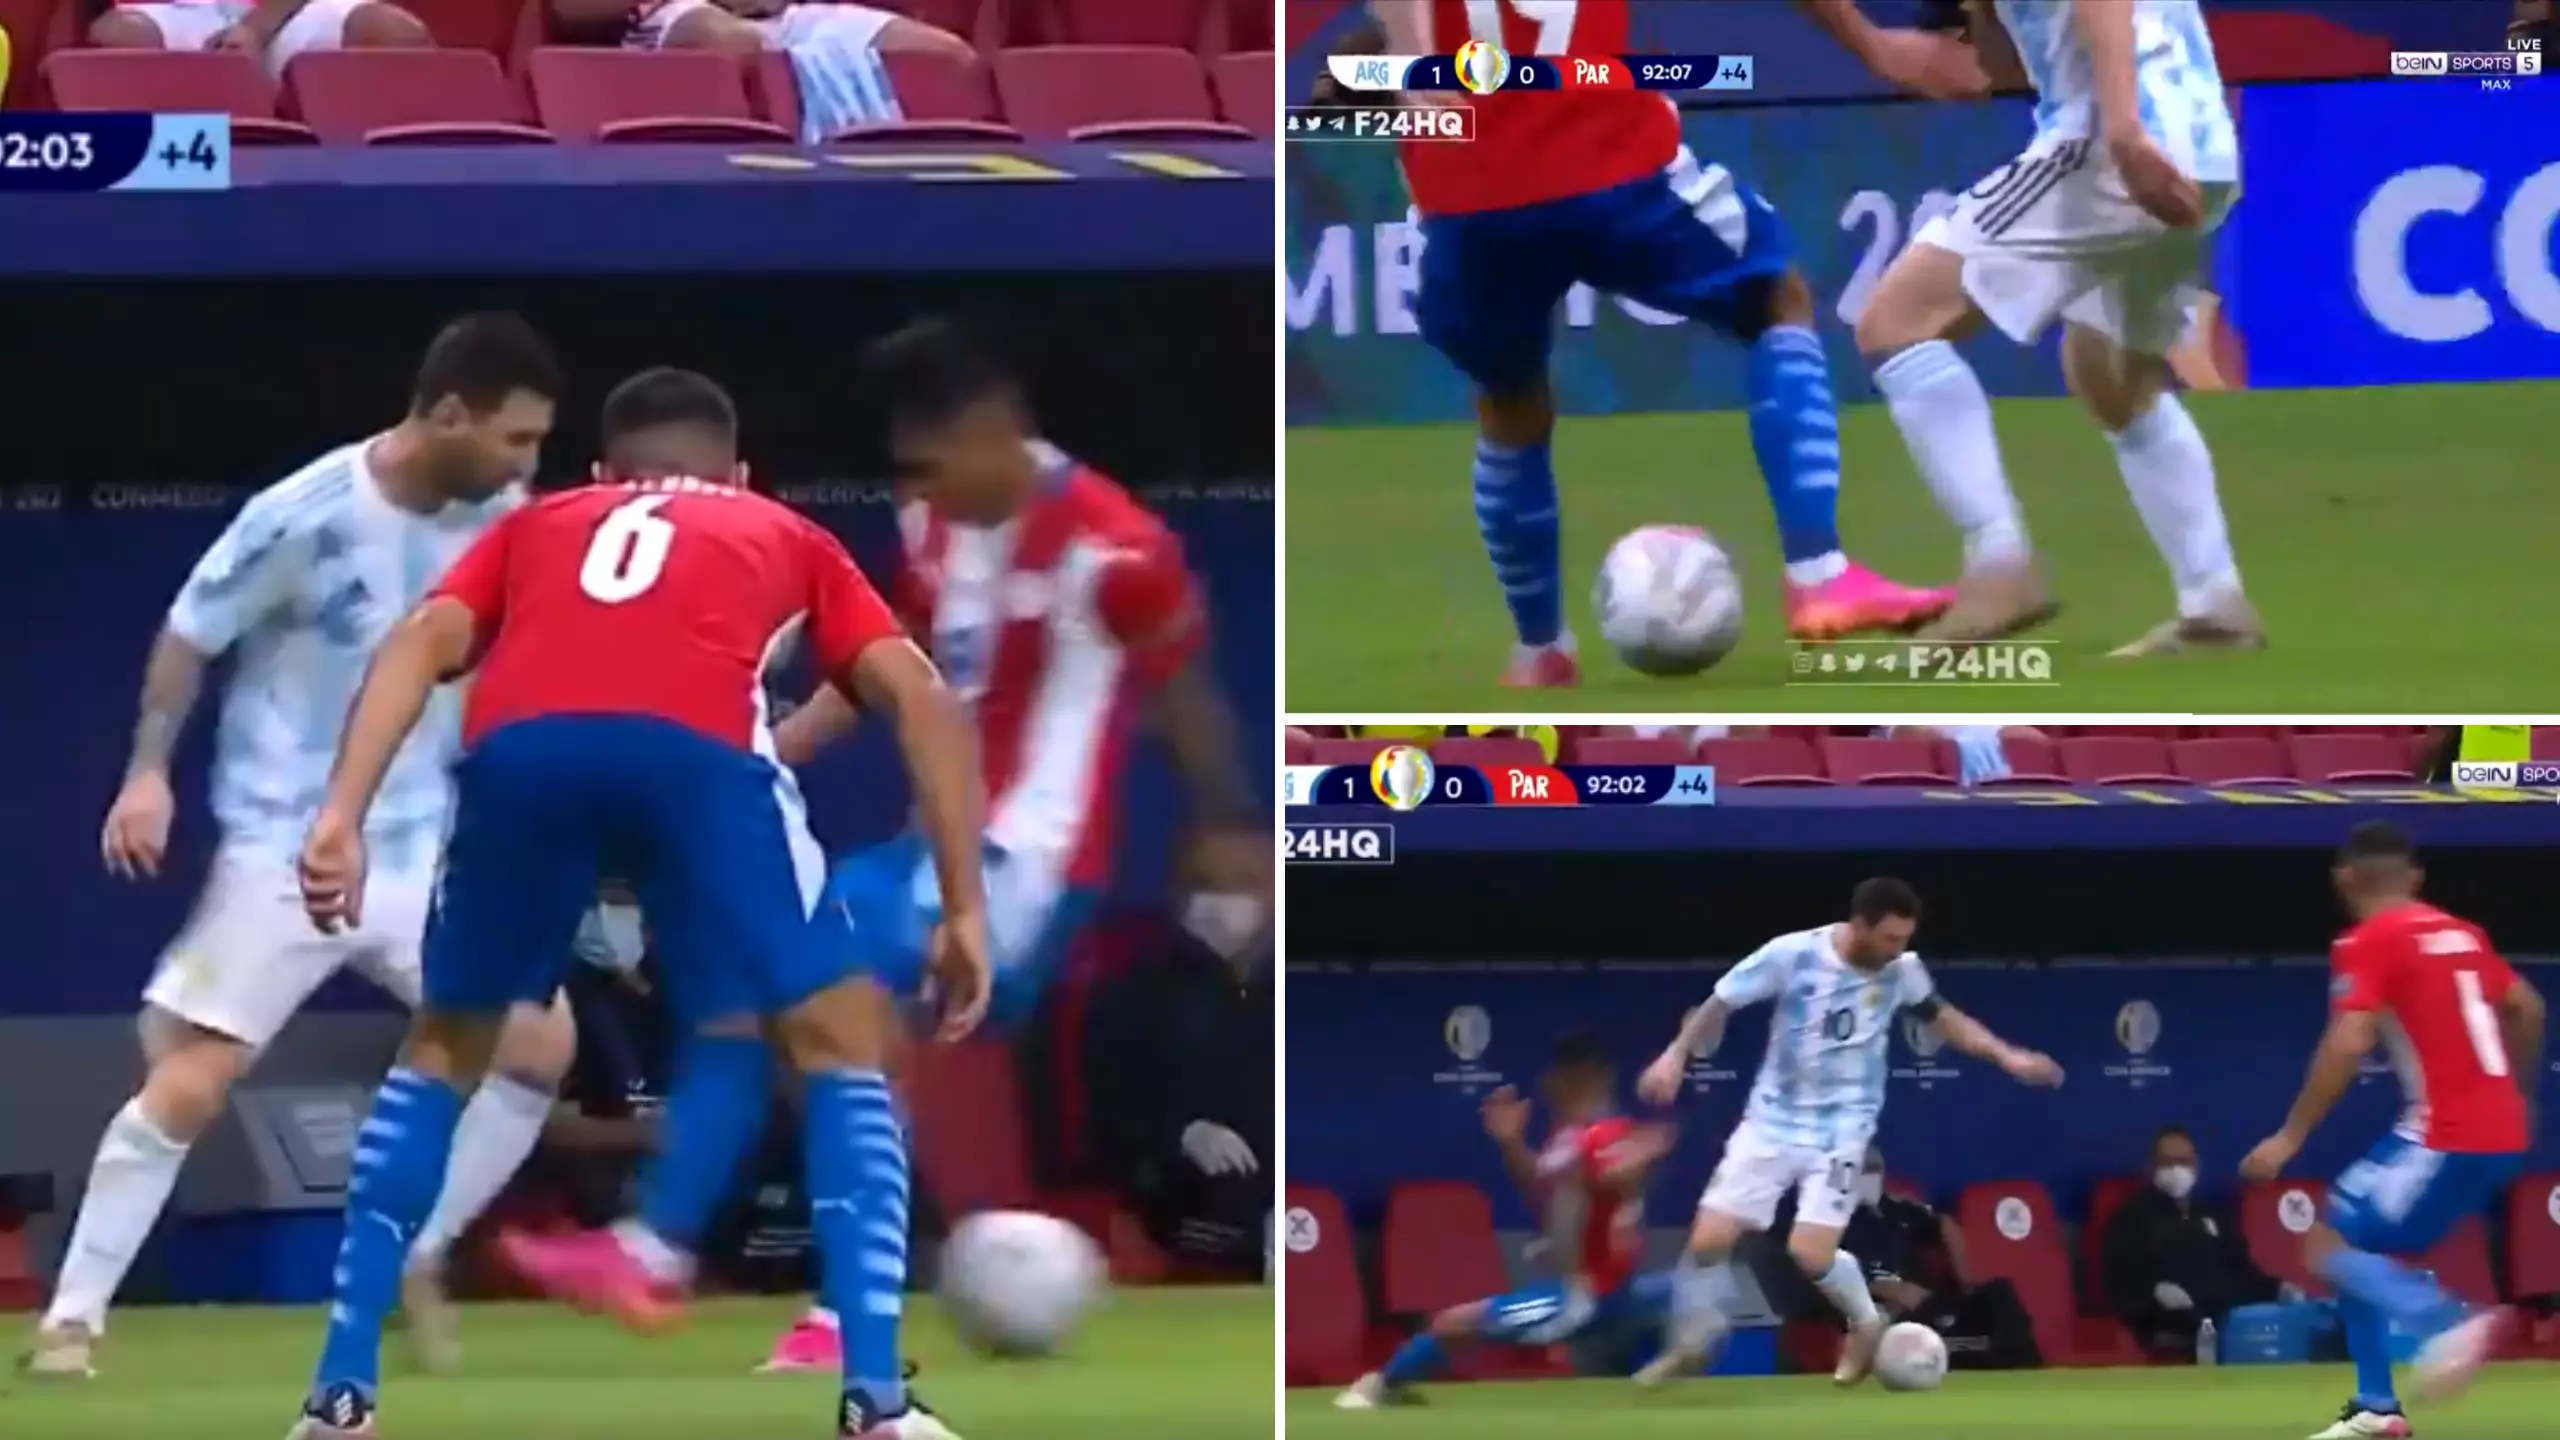 Lionel Messi Produced The Filthiest Nutmeg Of His Career Overnight, He's A Human Highlight Reel